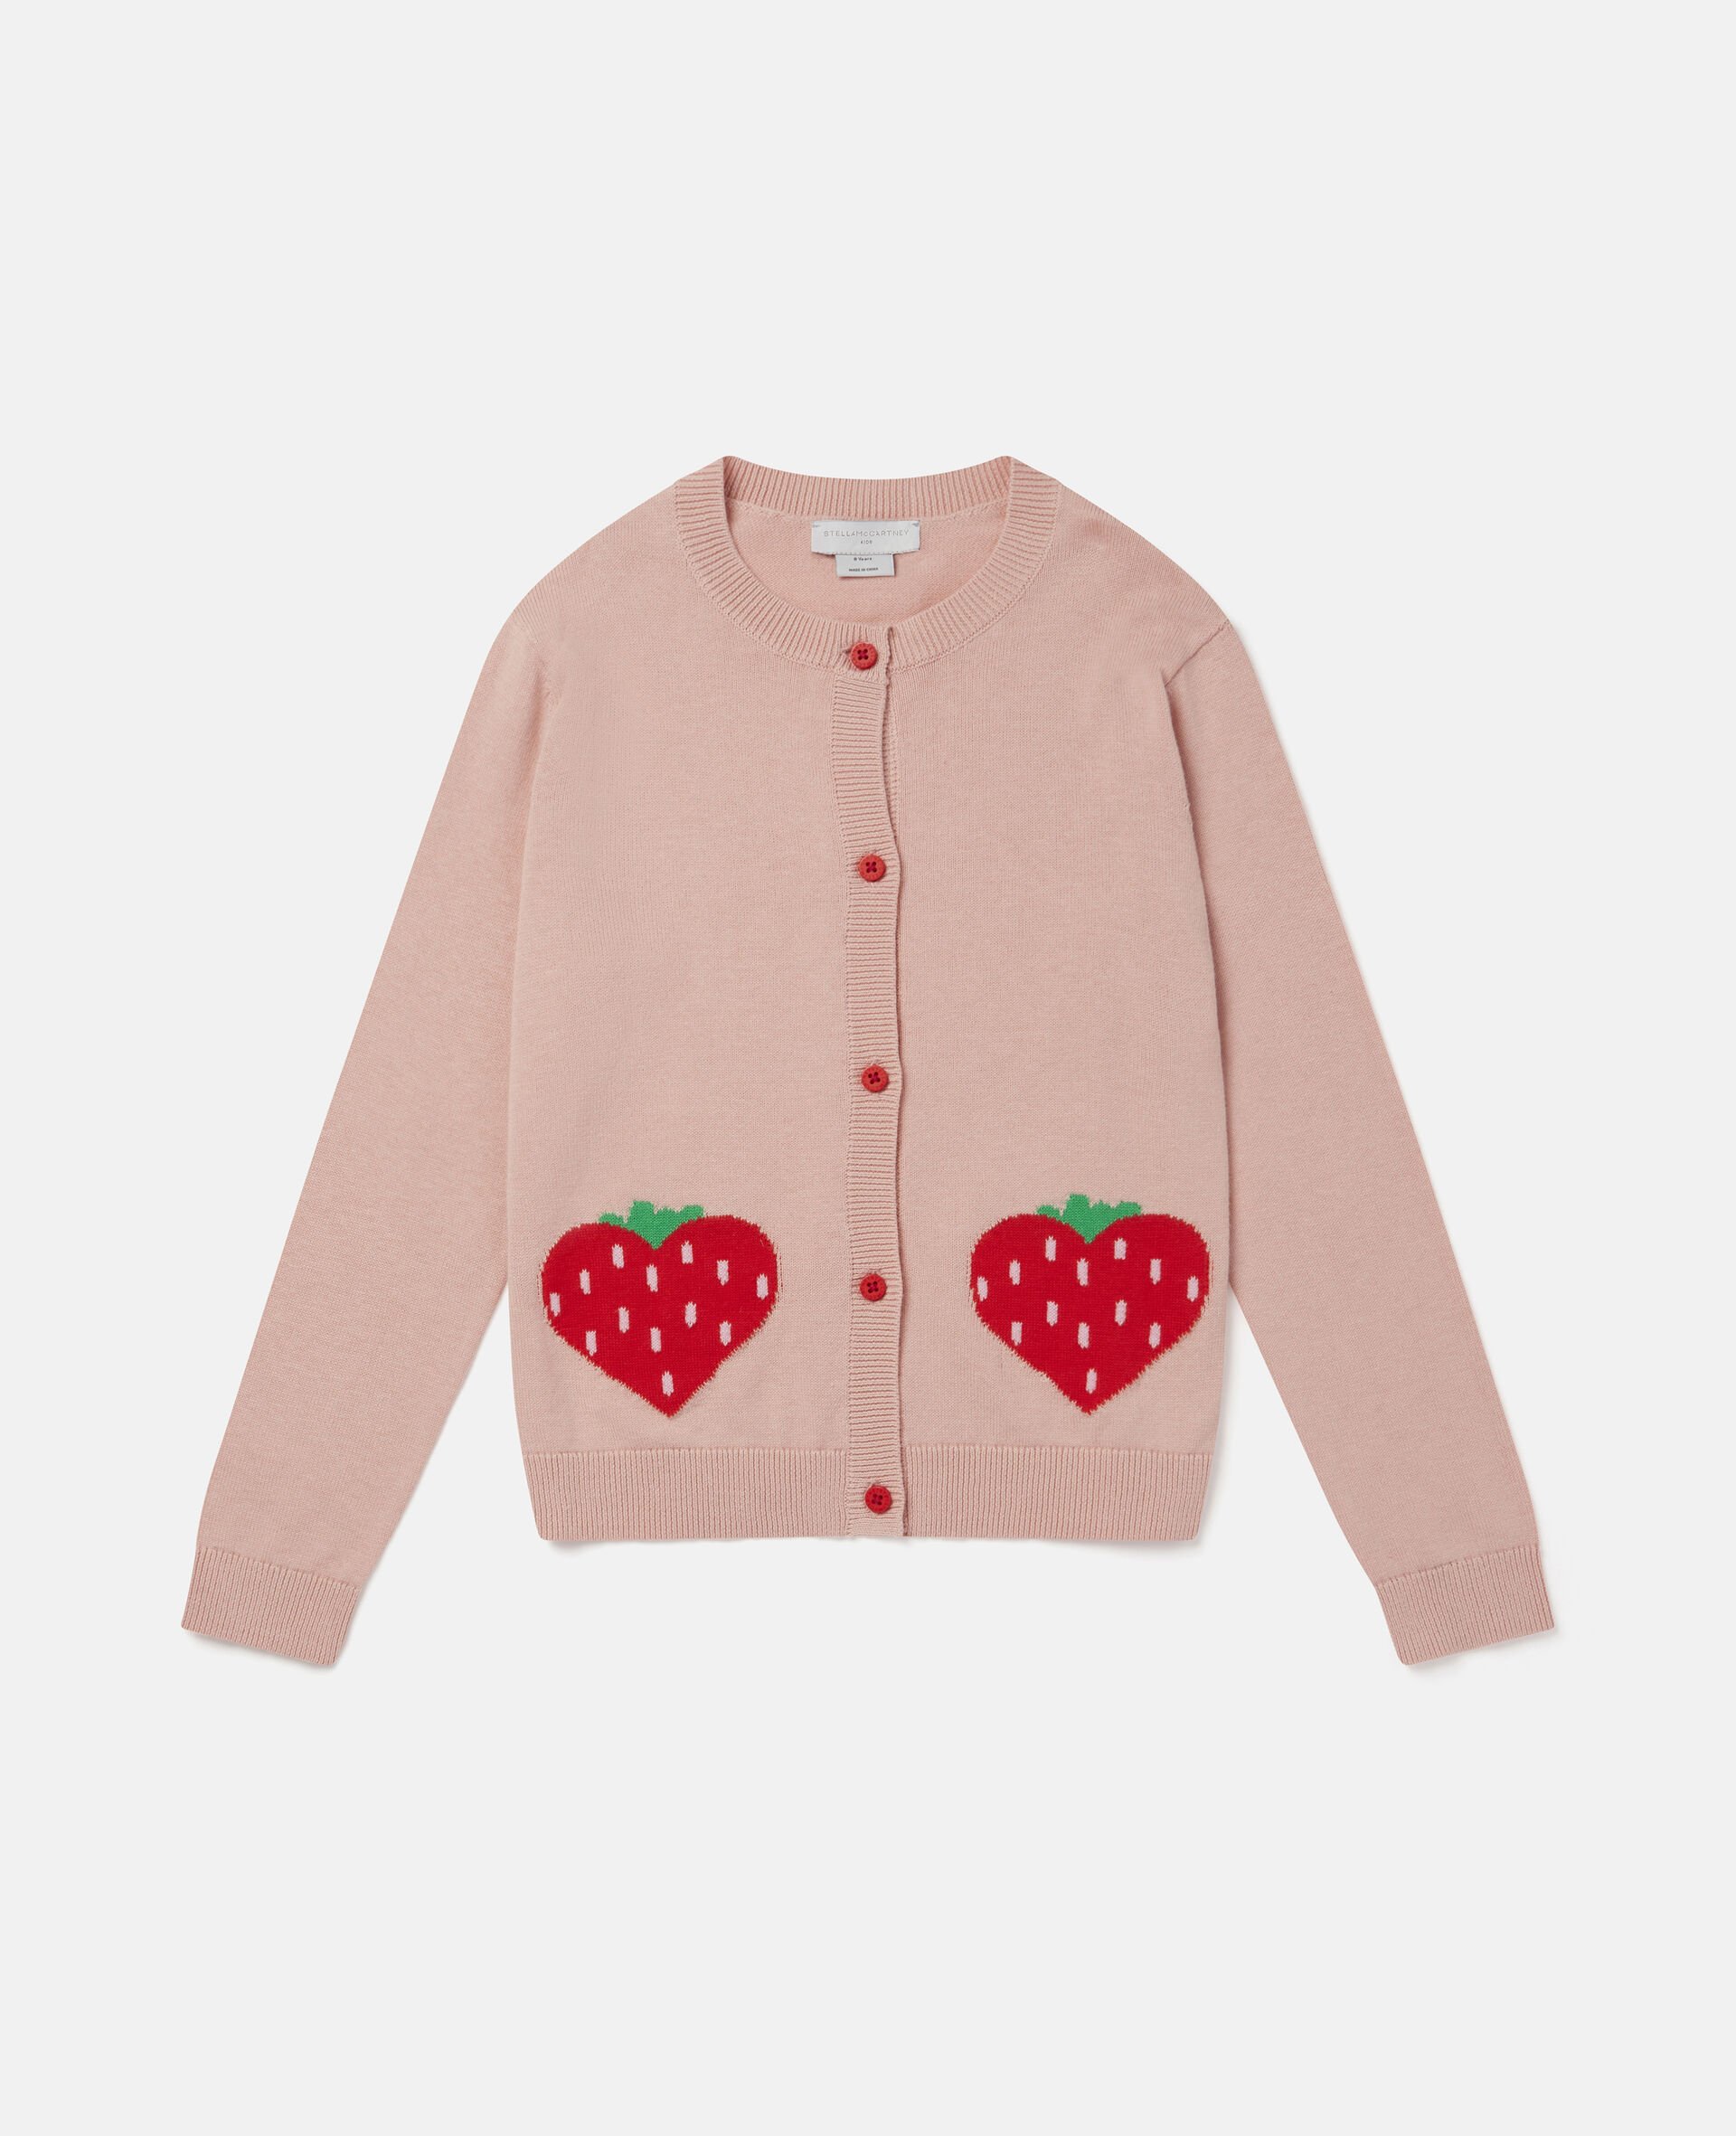 Strawberry Knit Cotton Cardigan-Pink-large image number 0